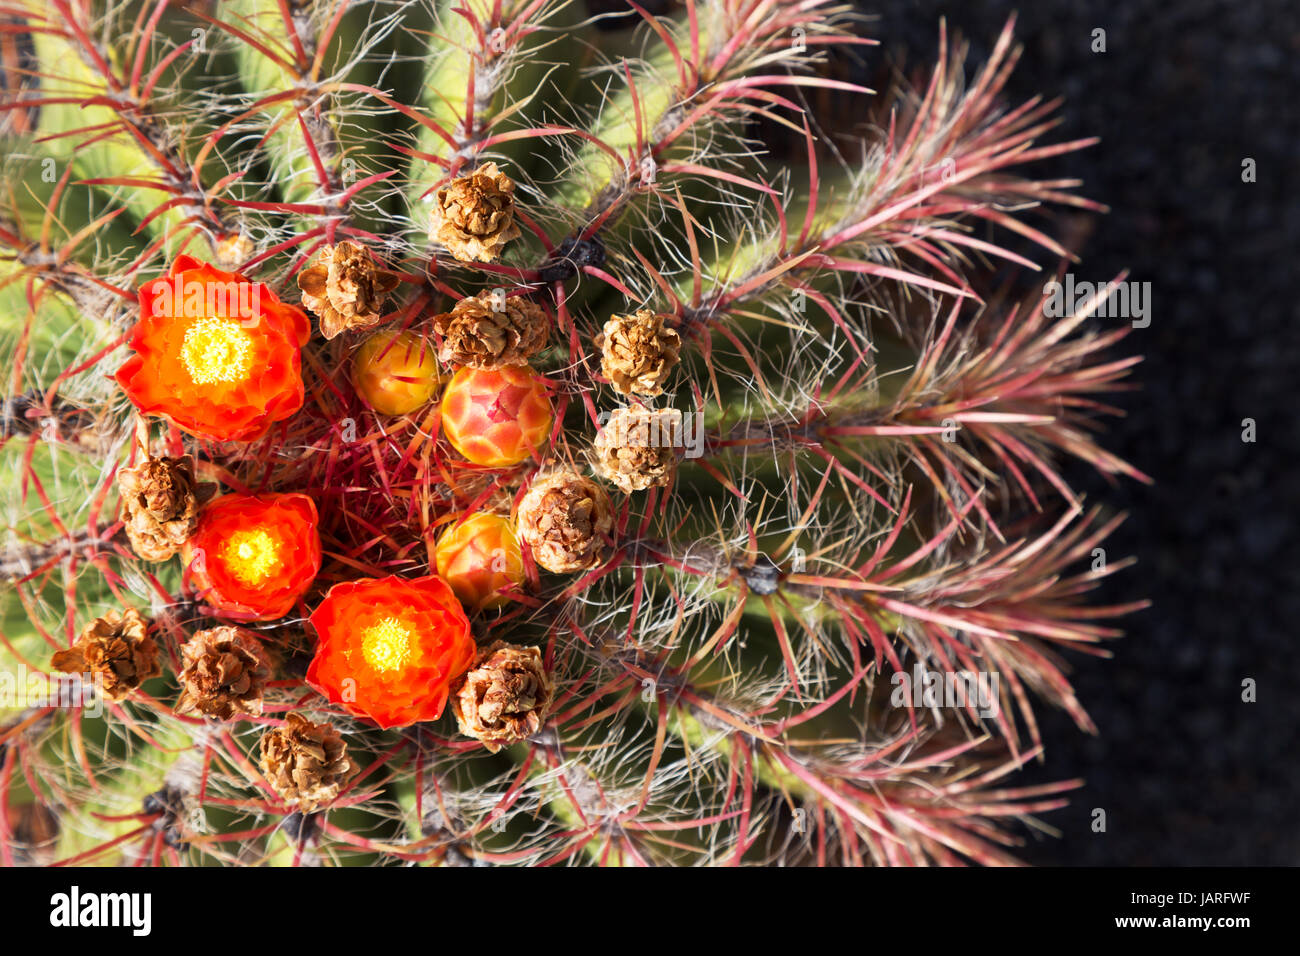 Red  cactus flowers on a flowering barrel cactus, Lanzarote, Canary Islands, Europe Stock Photo